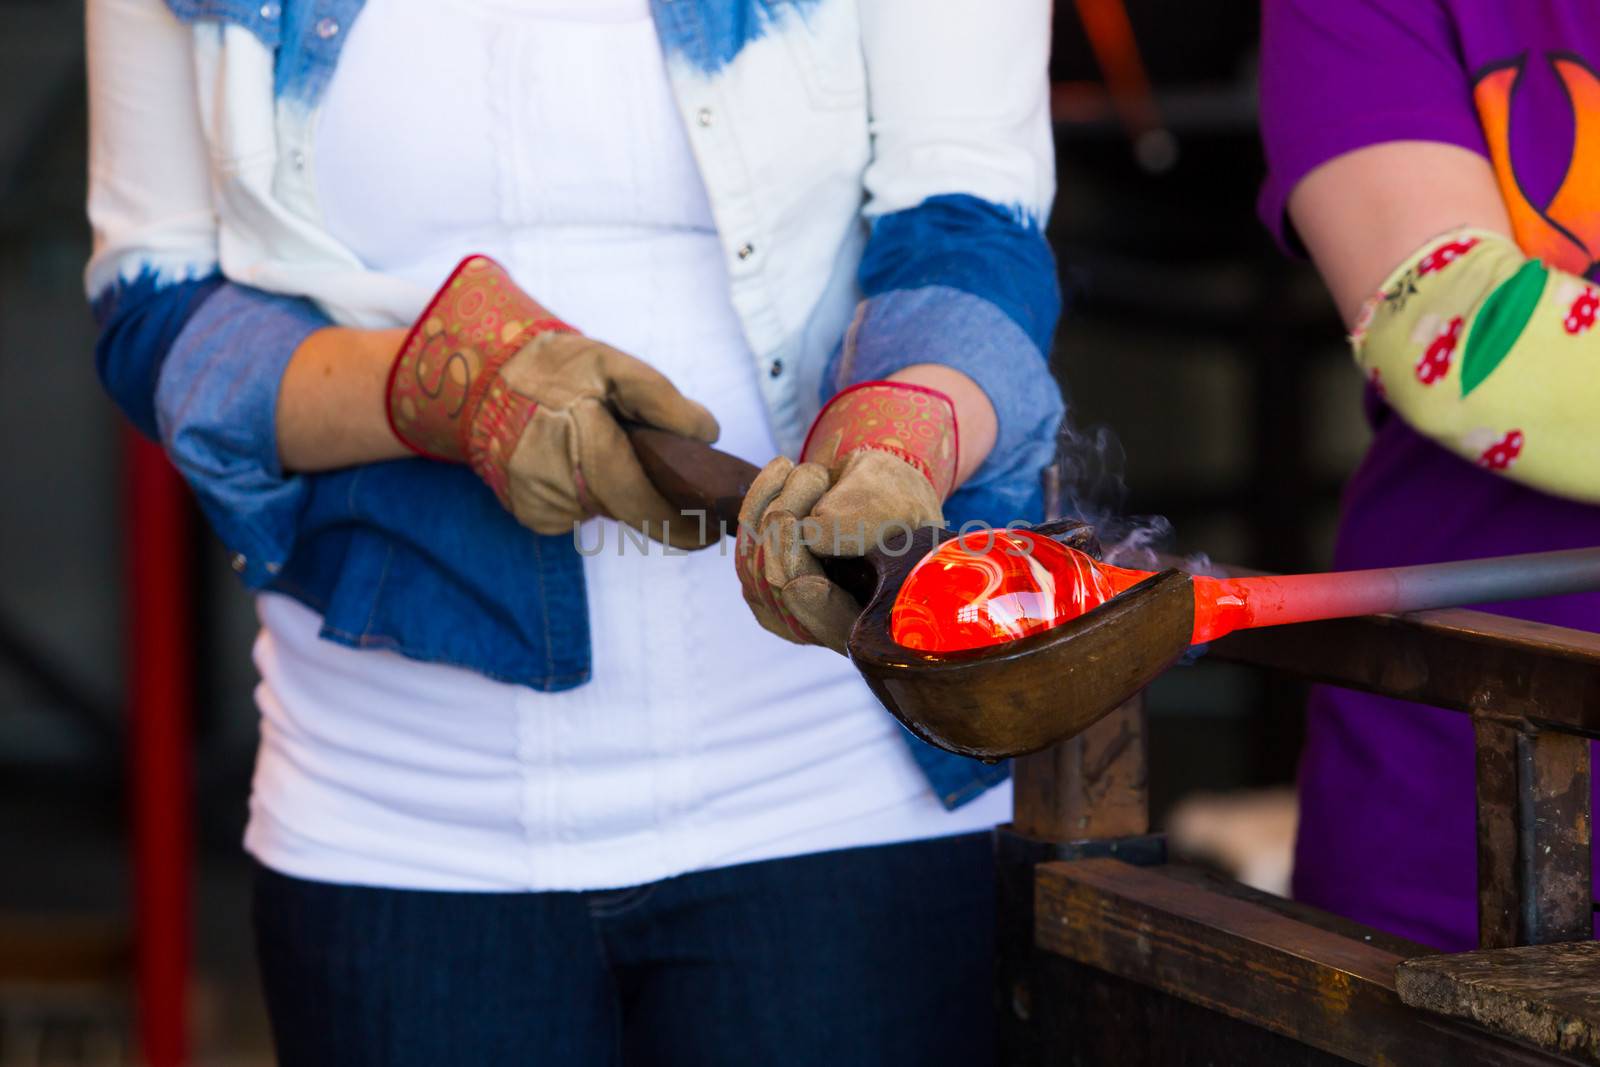 A female is blowing glass and using a wooden shaping tool to form the shape she wants the glass to end up as. The glass is hot and molten so she has to use water with the wood.